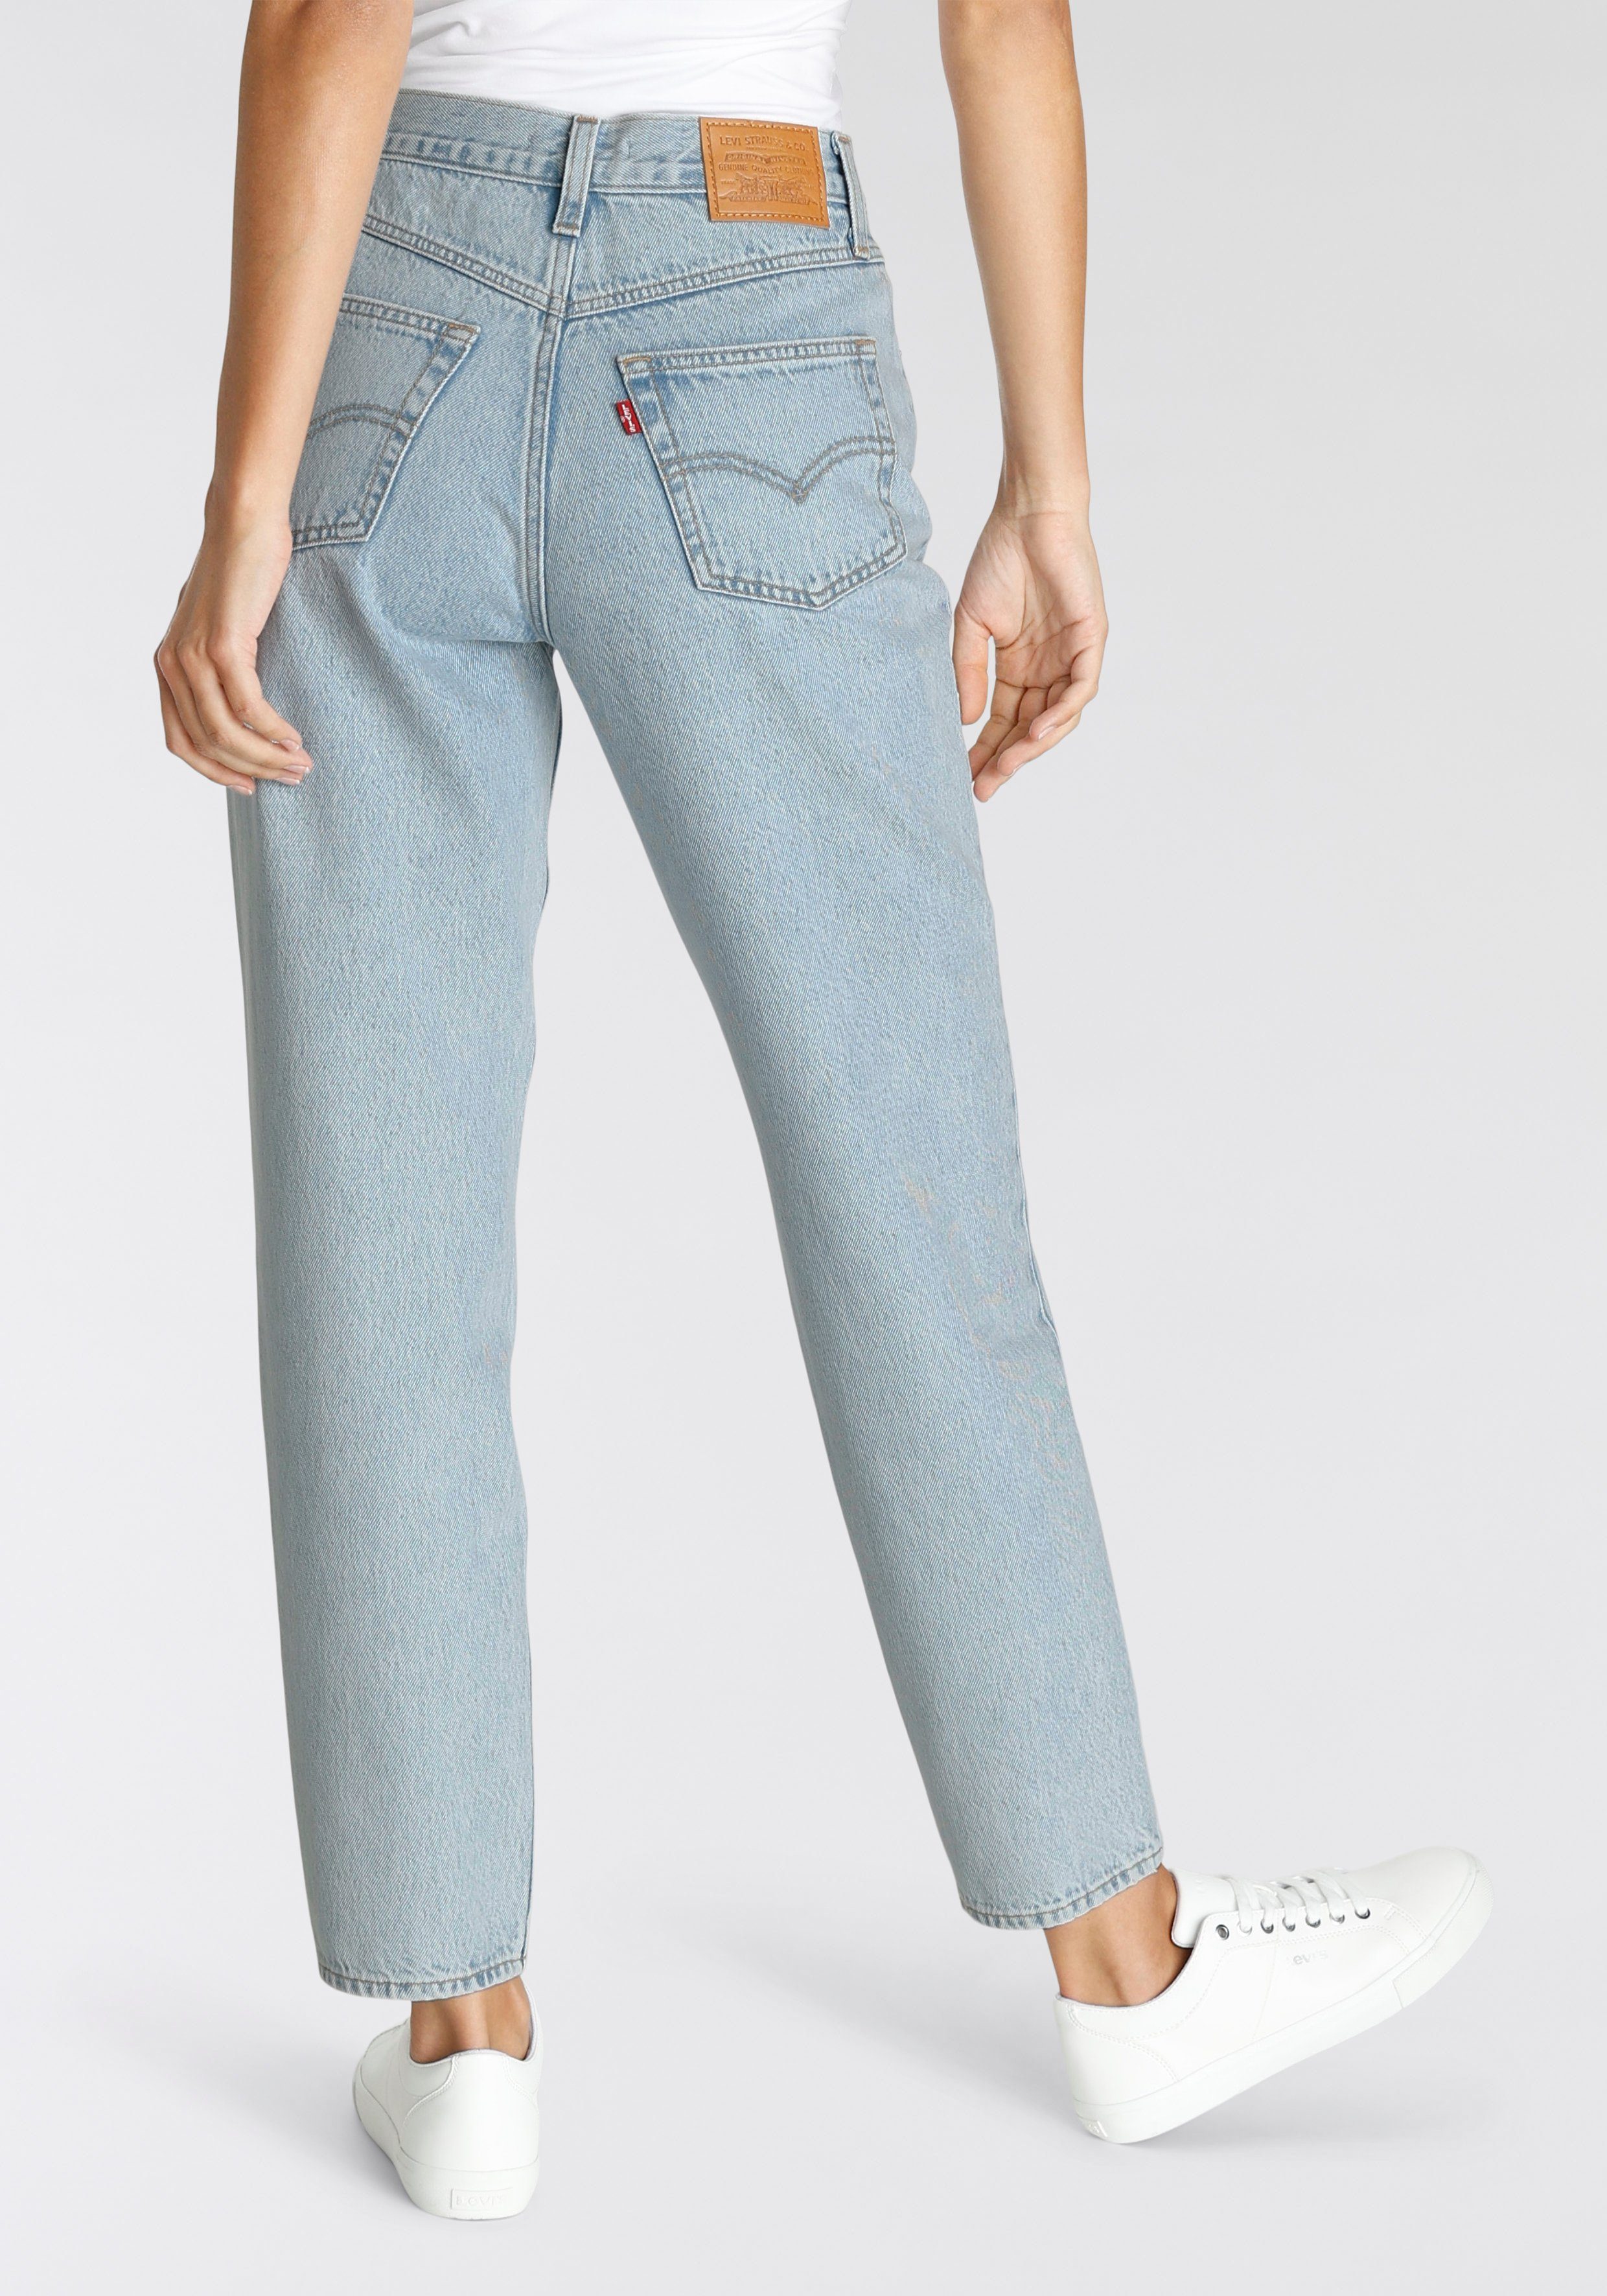 frayed JEANS MOM be Mom-Jeans Levi's® 80S don't